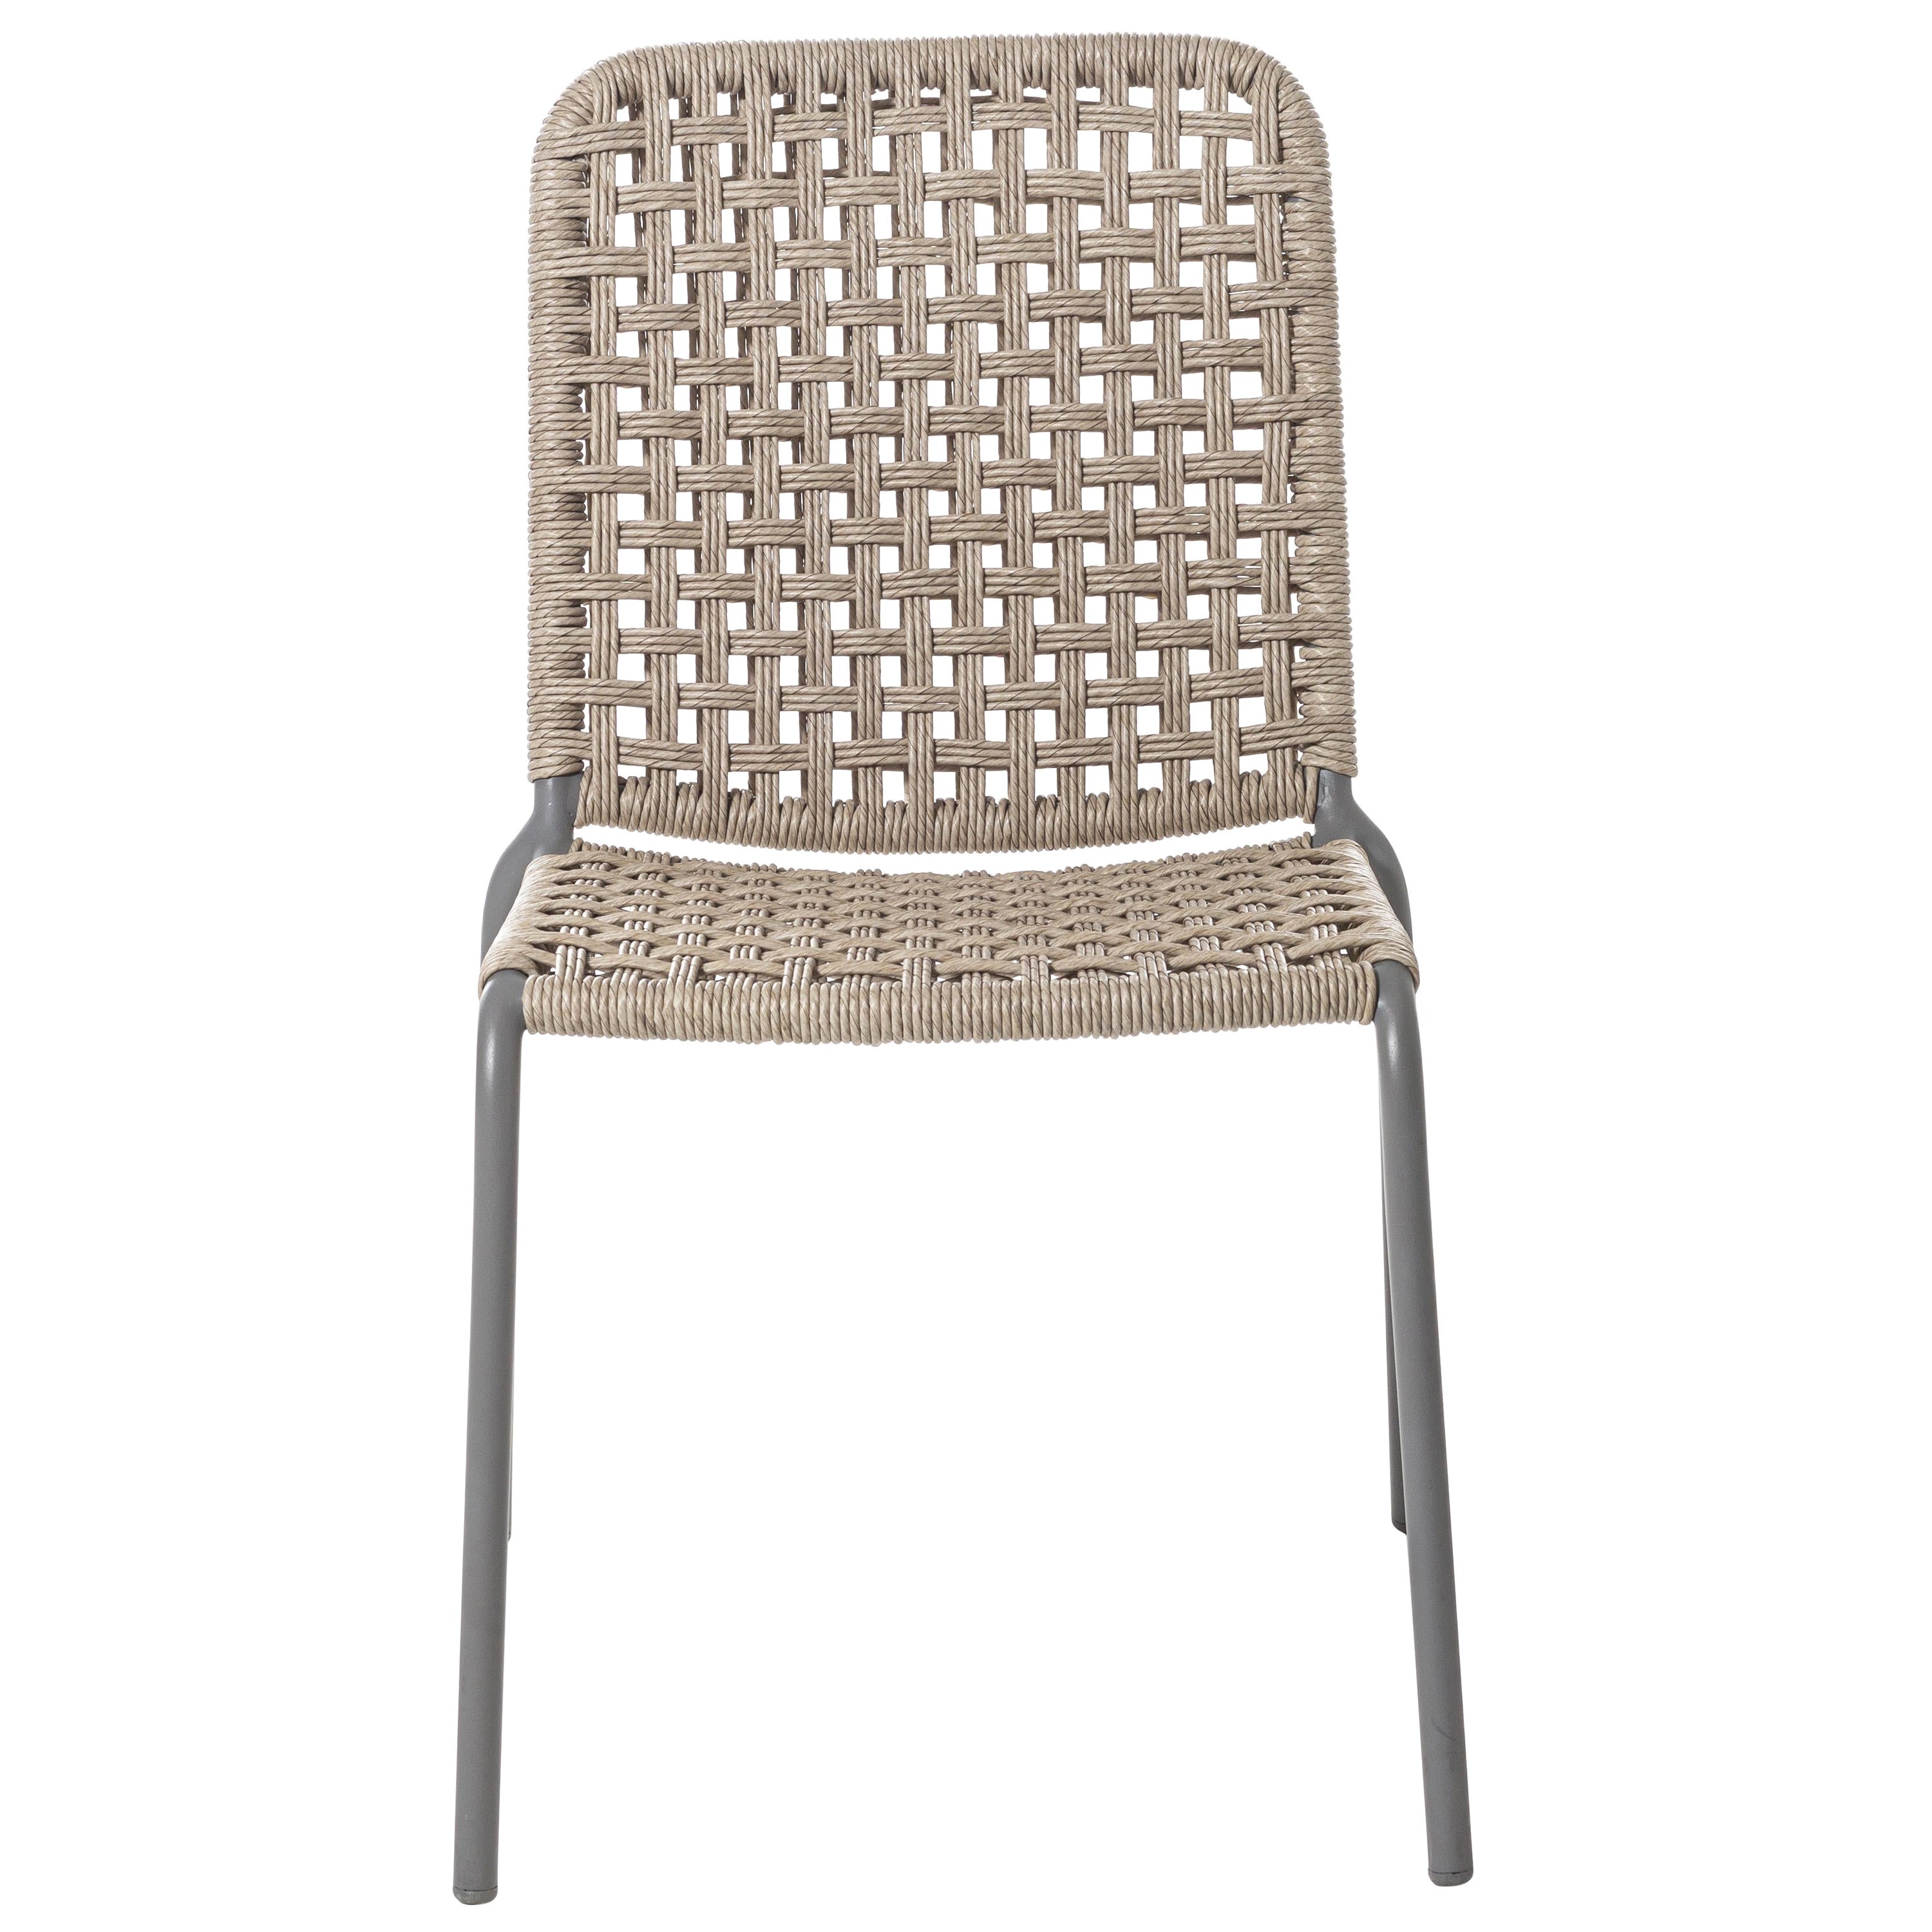 Gervasoni Straw Chair in Light Grey Aluminium Frame with Woven Resin Fiber Seat For Sale